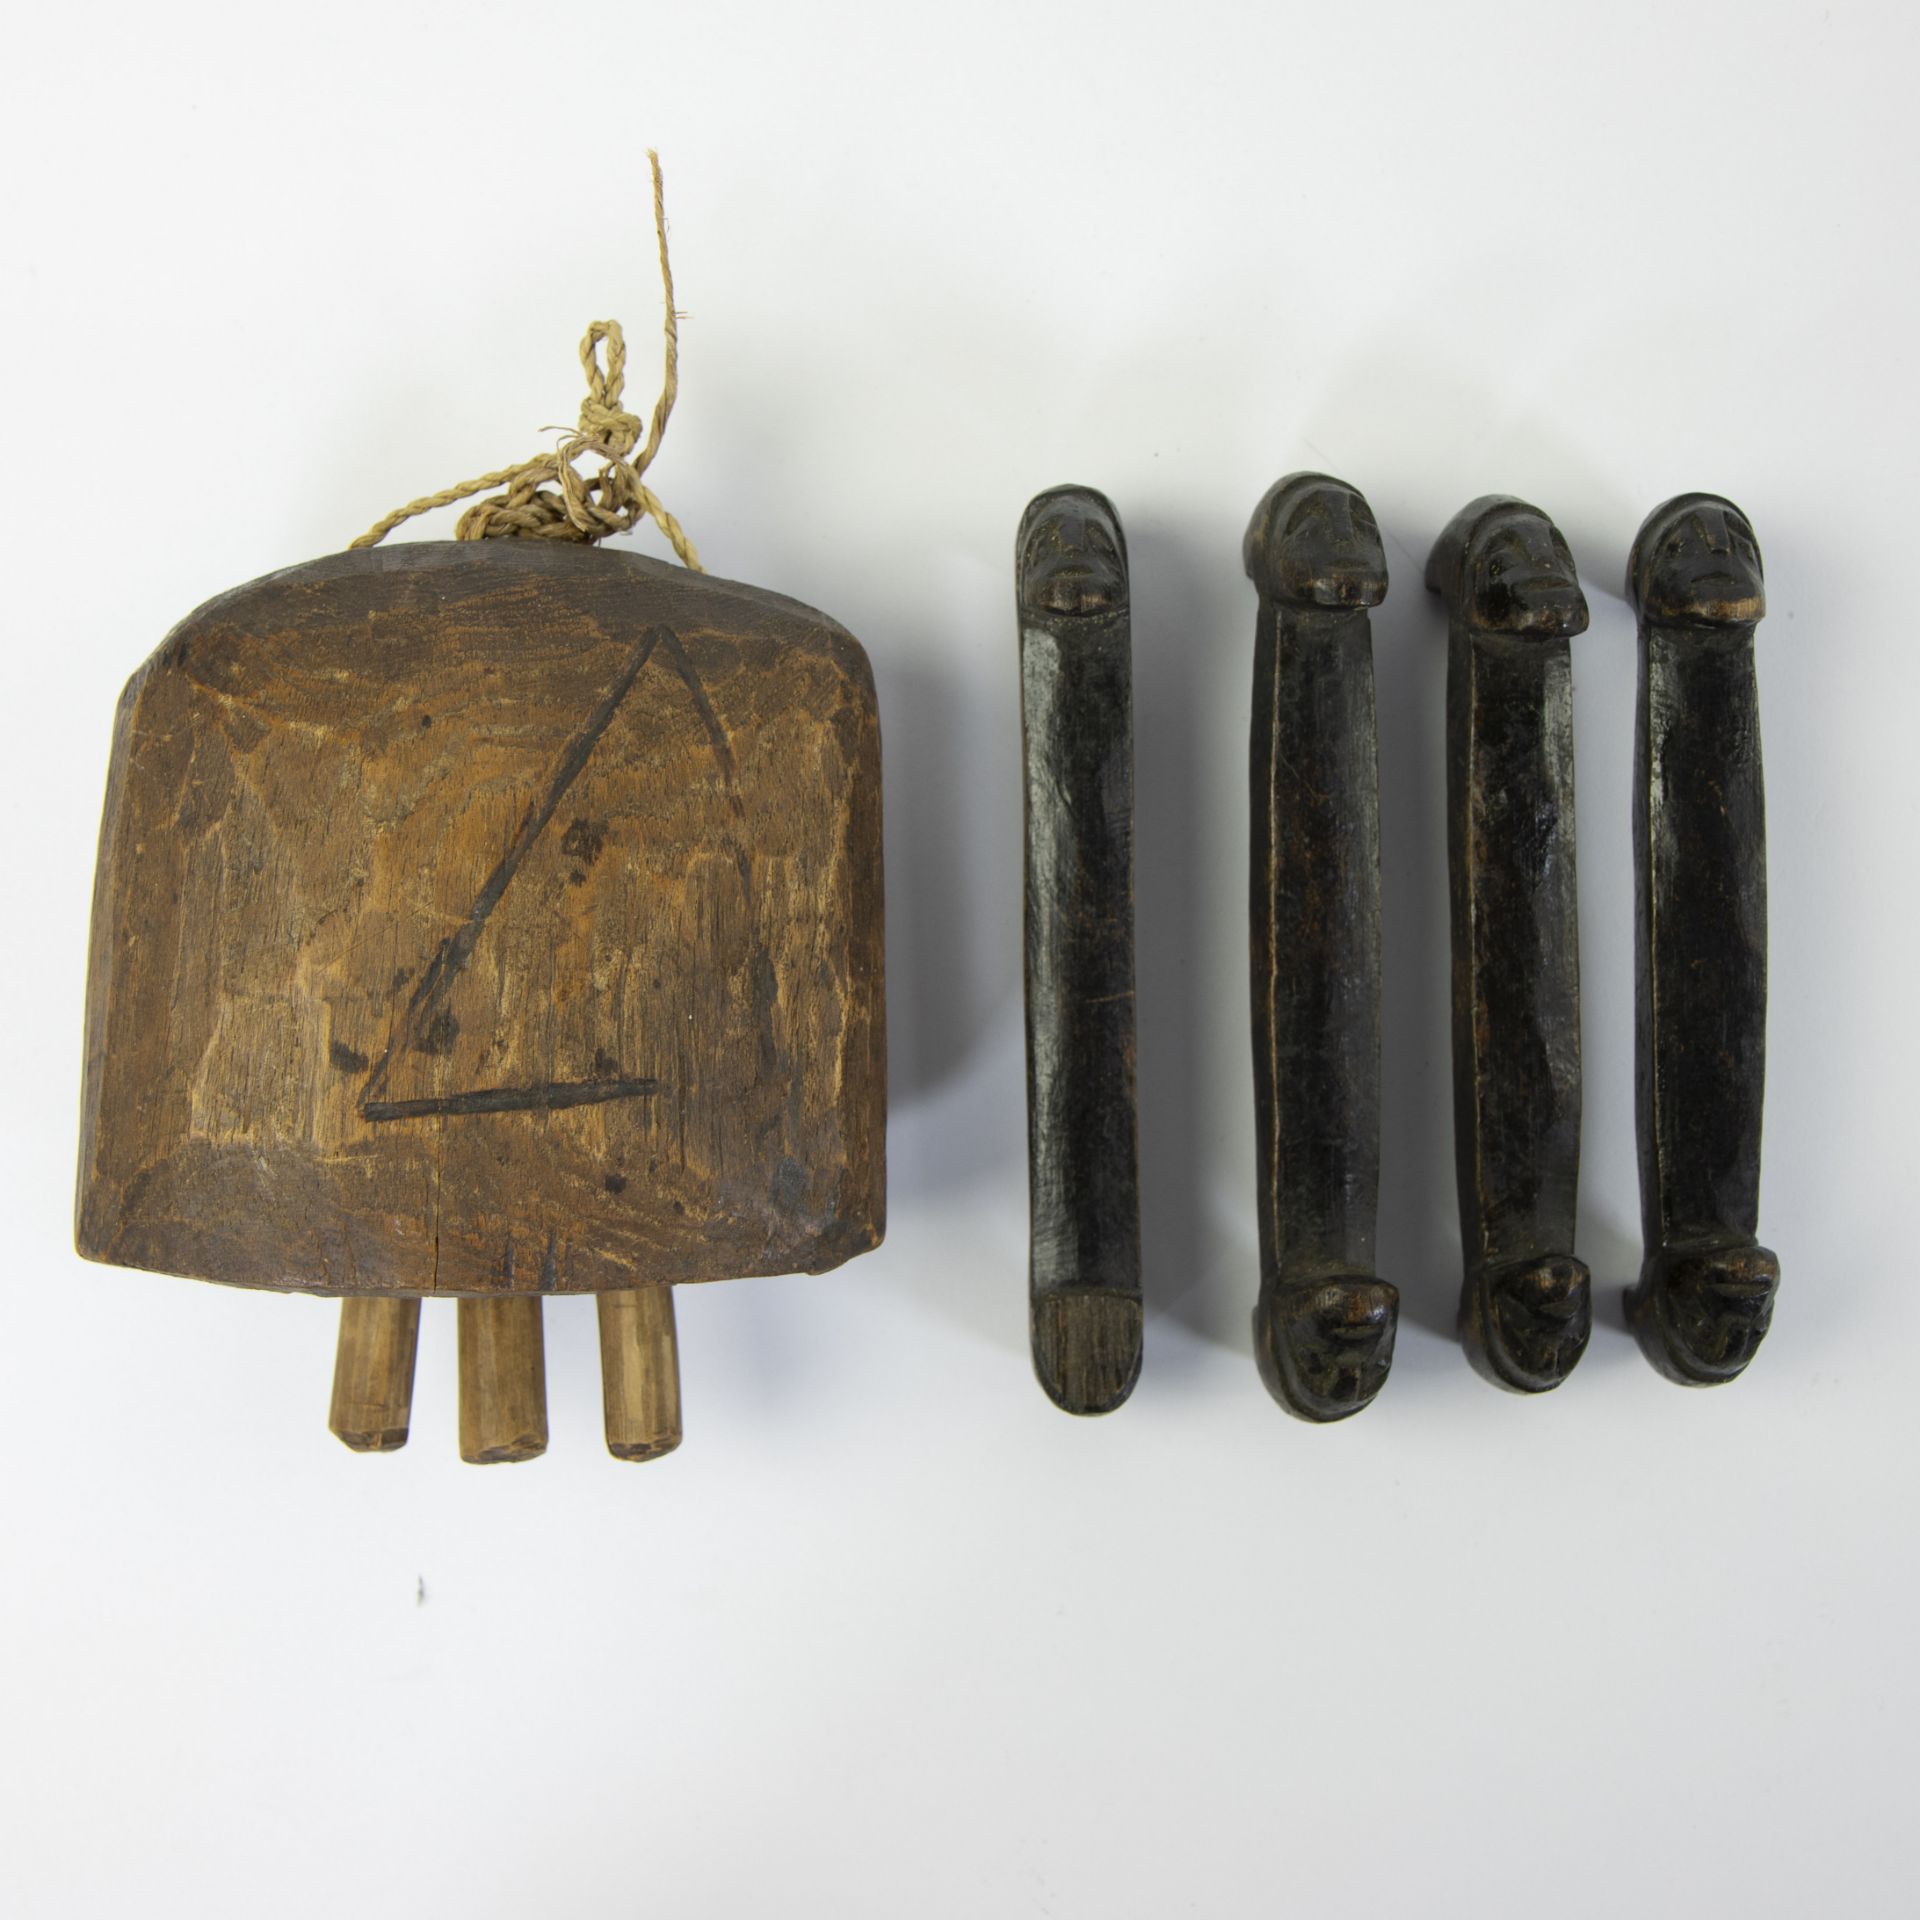 Tribal objects from Kilo-Moto (Belgian Congo) period 1927, 4 rattles and wooden bell